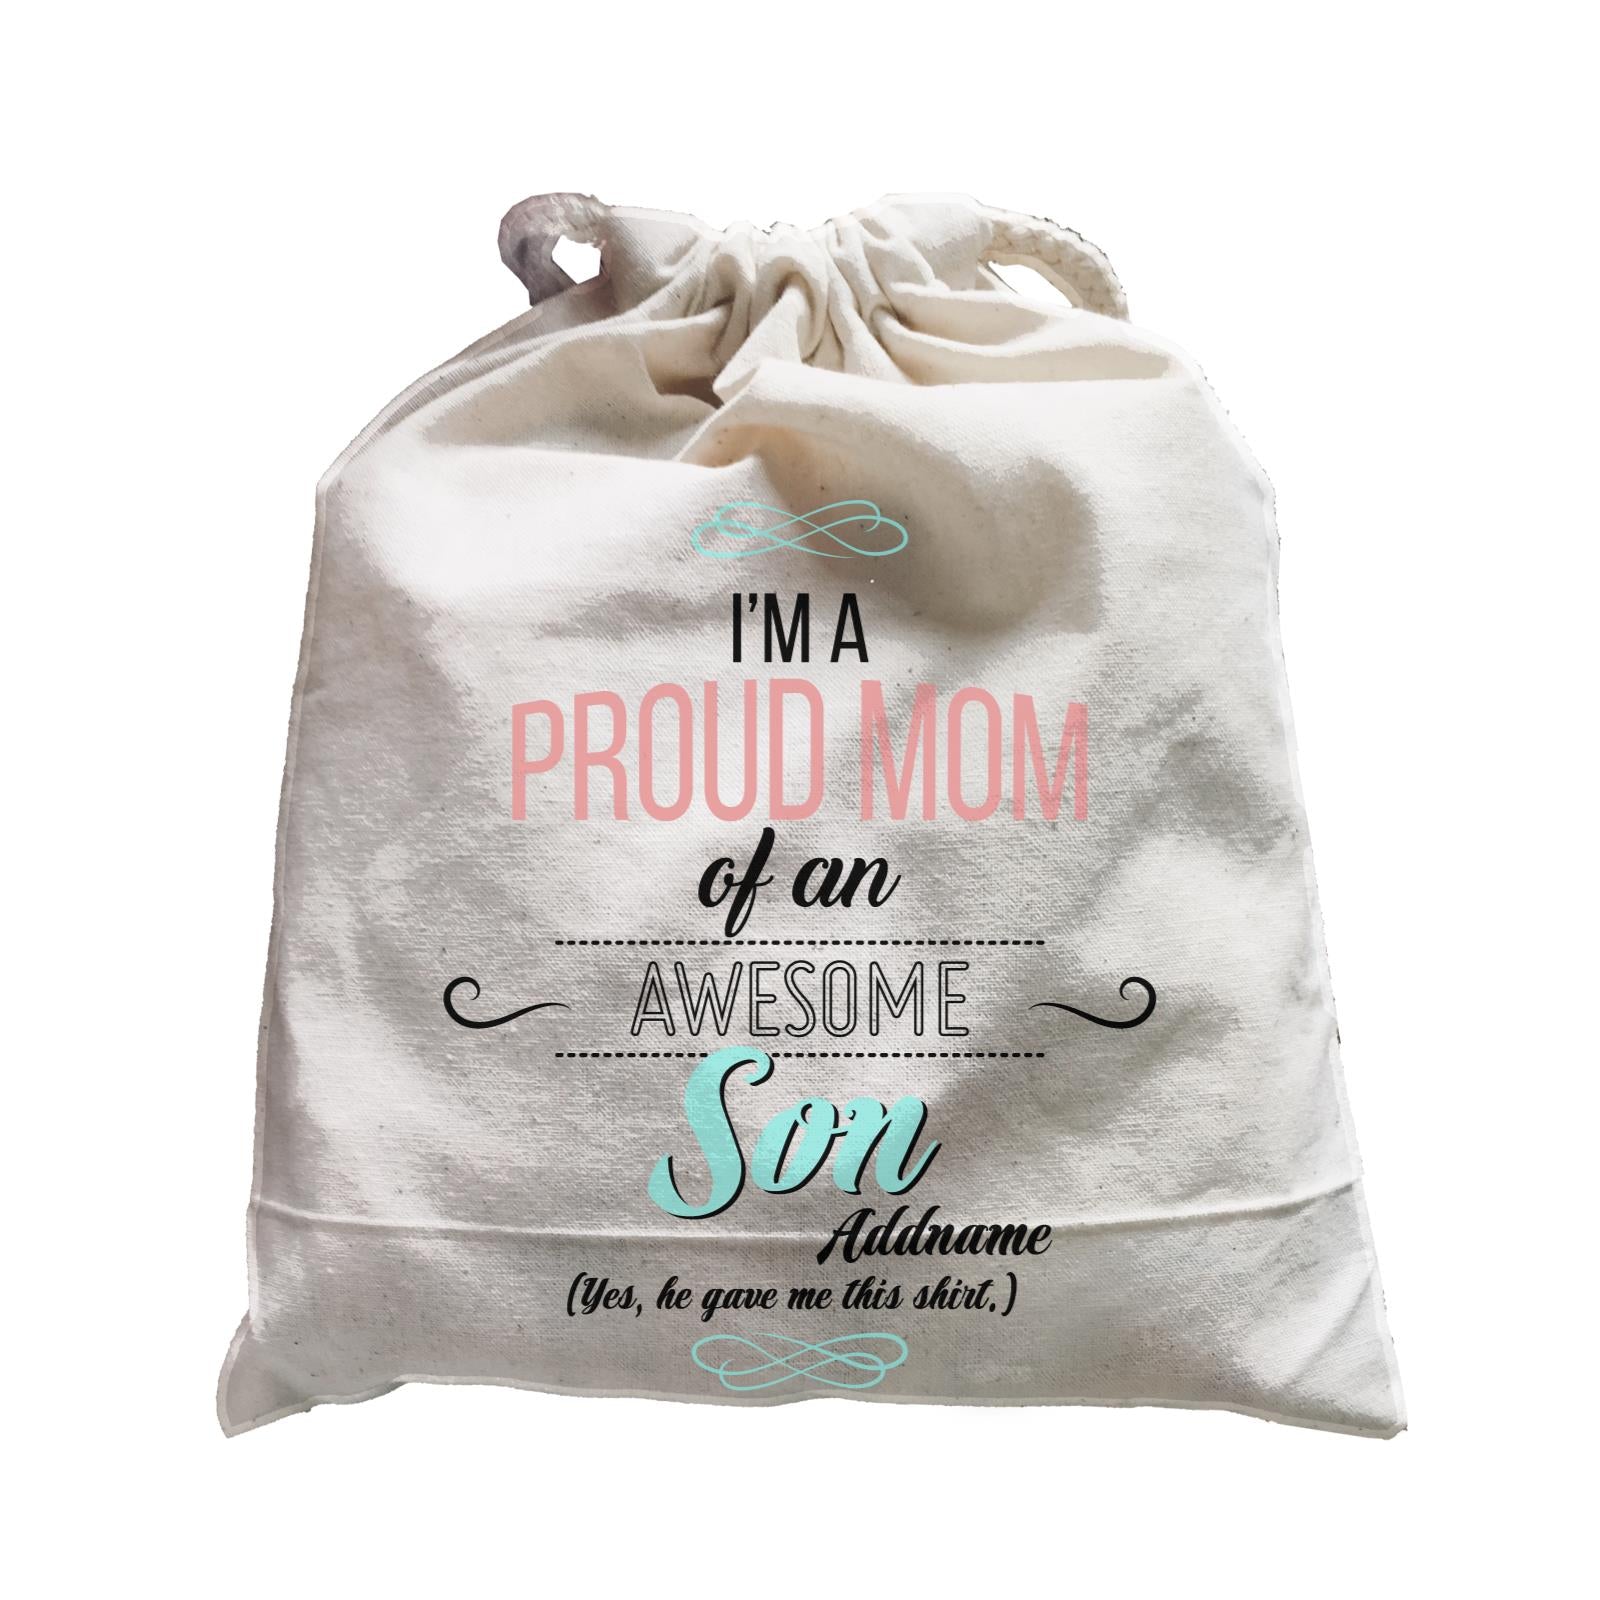 I'm A Proud Mom Of An Awesome Son Personalizable with Name Satchel